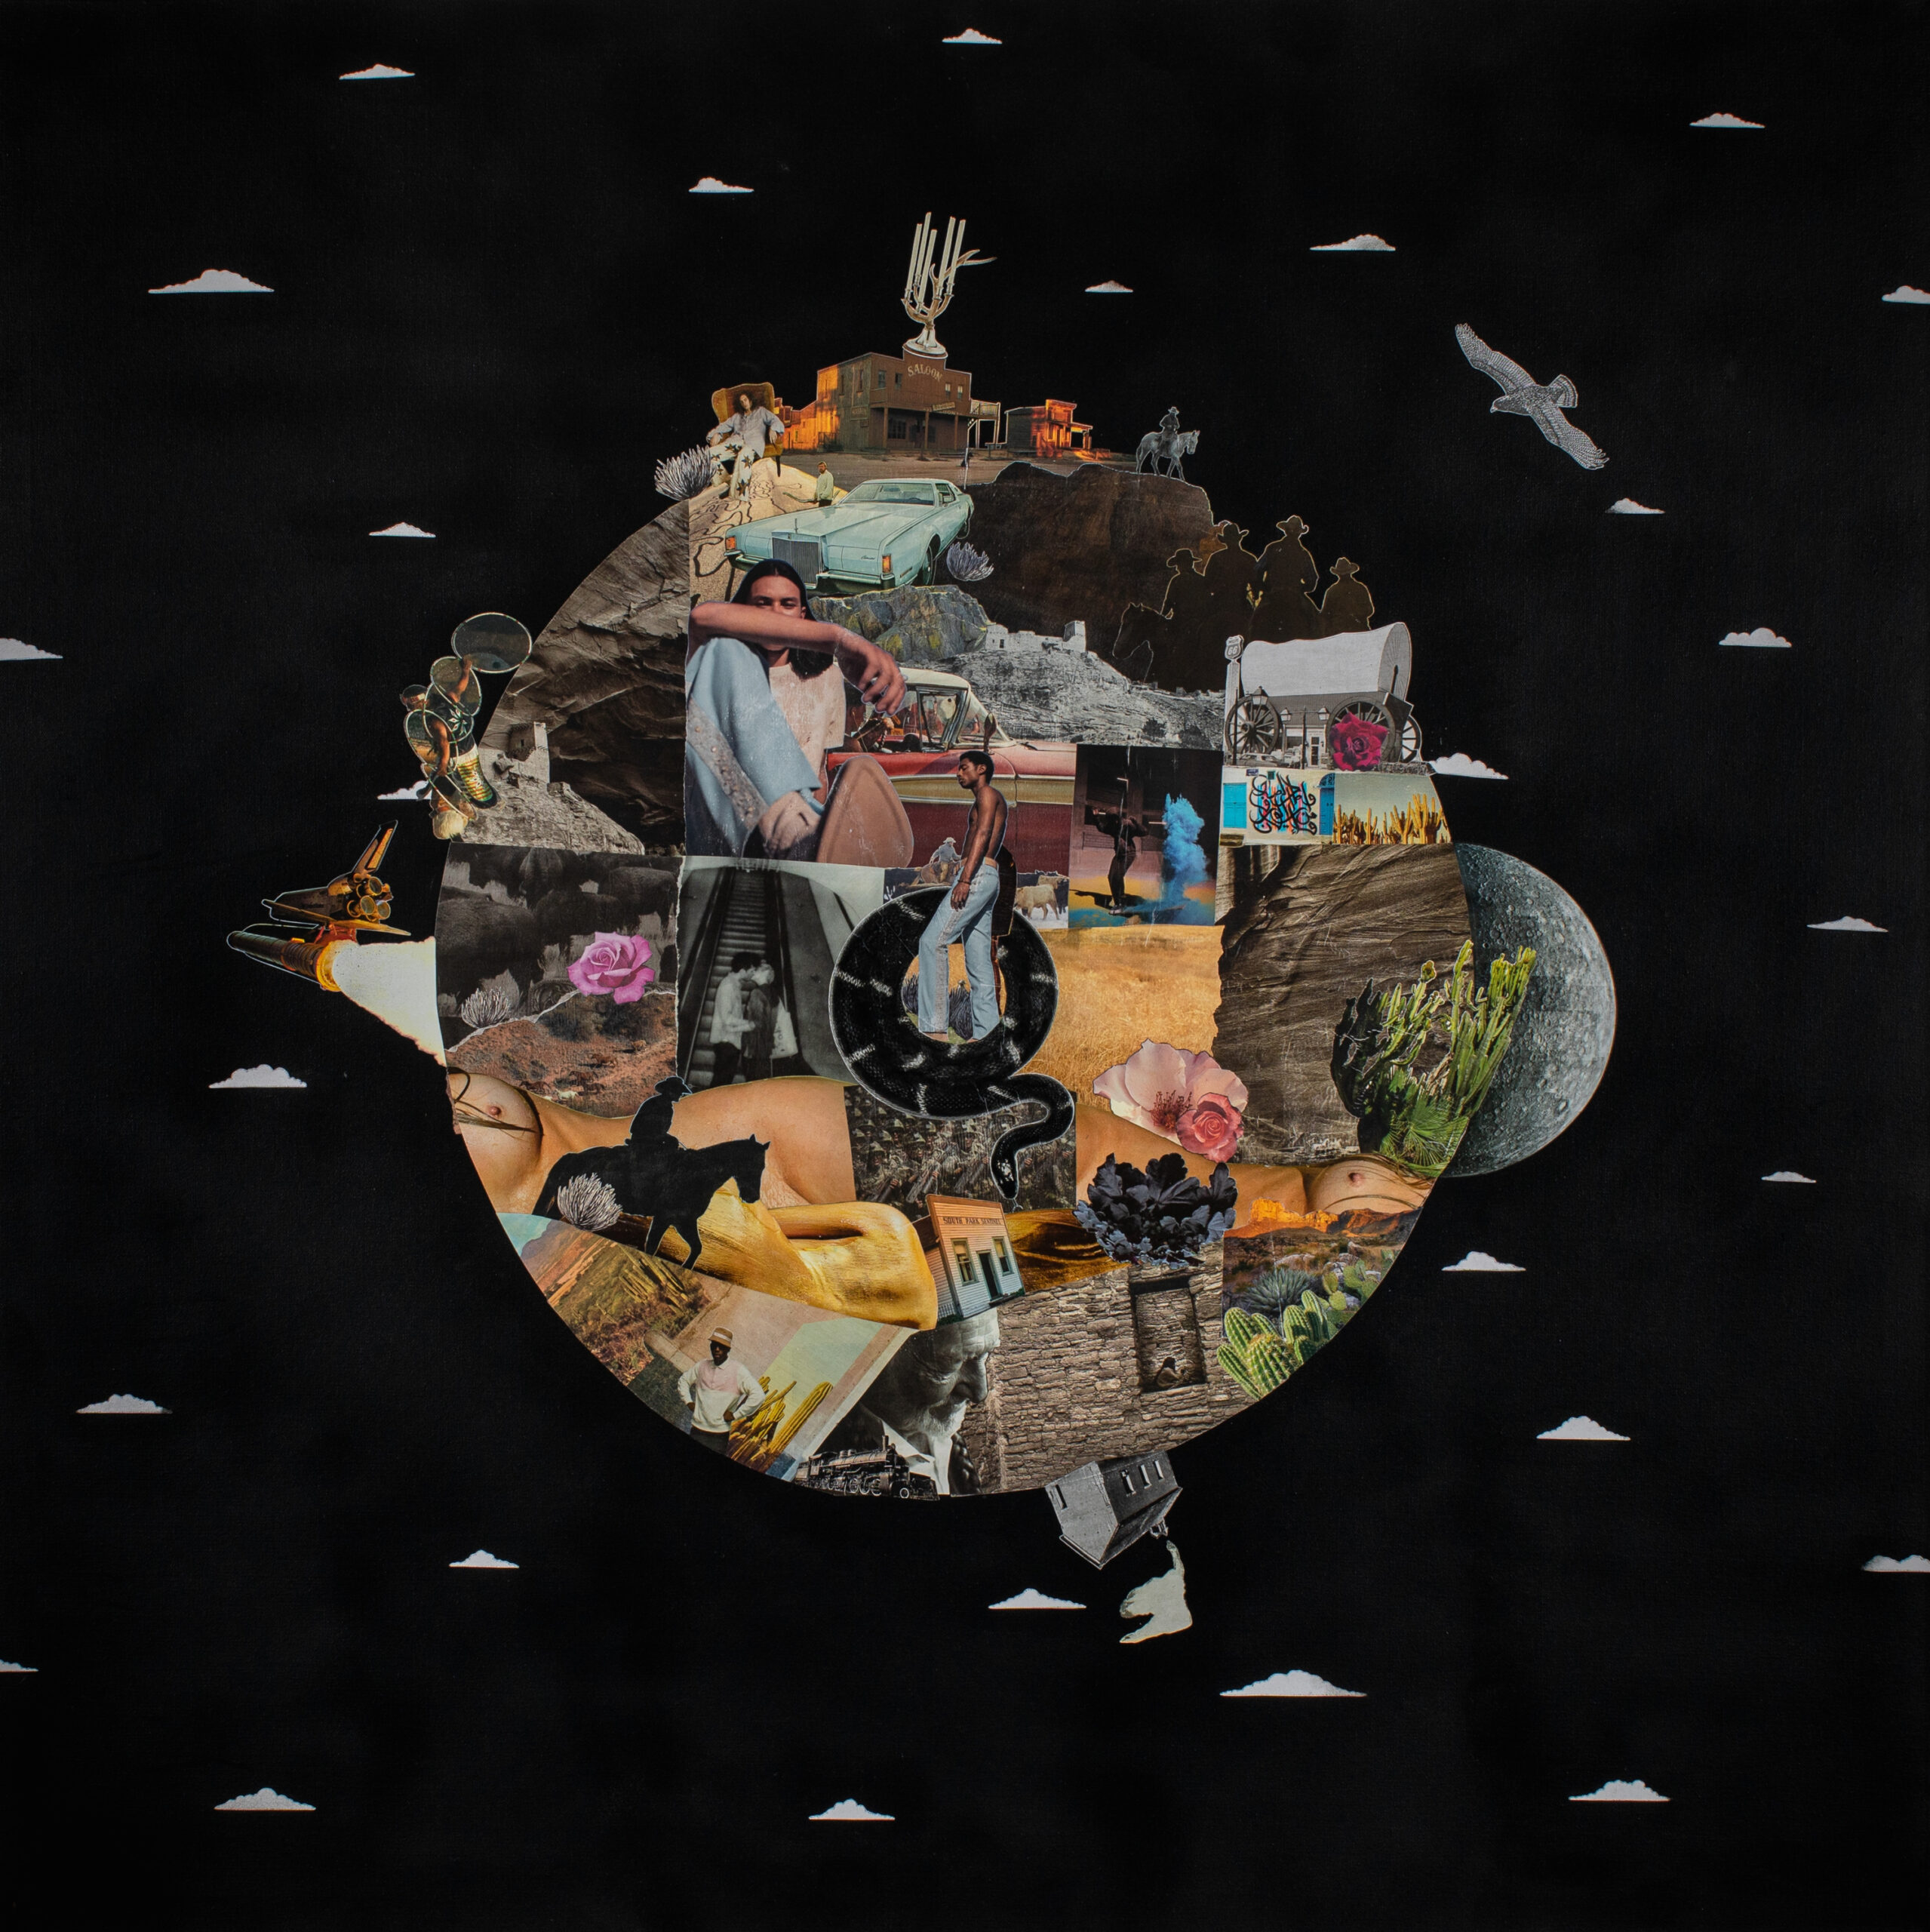 Un Pays Sans Frontieres (A Country Without Borders), collage, acrylic, spray paint, oil on canvas, 48x48x2